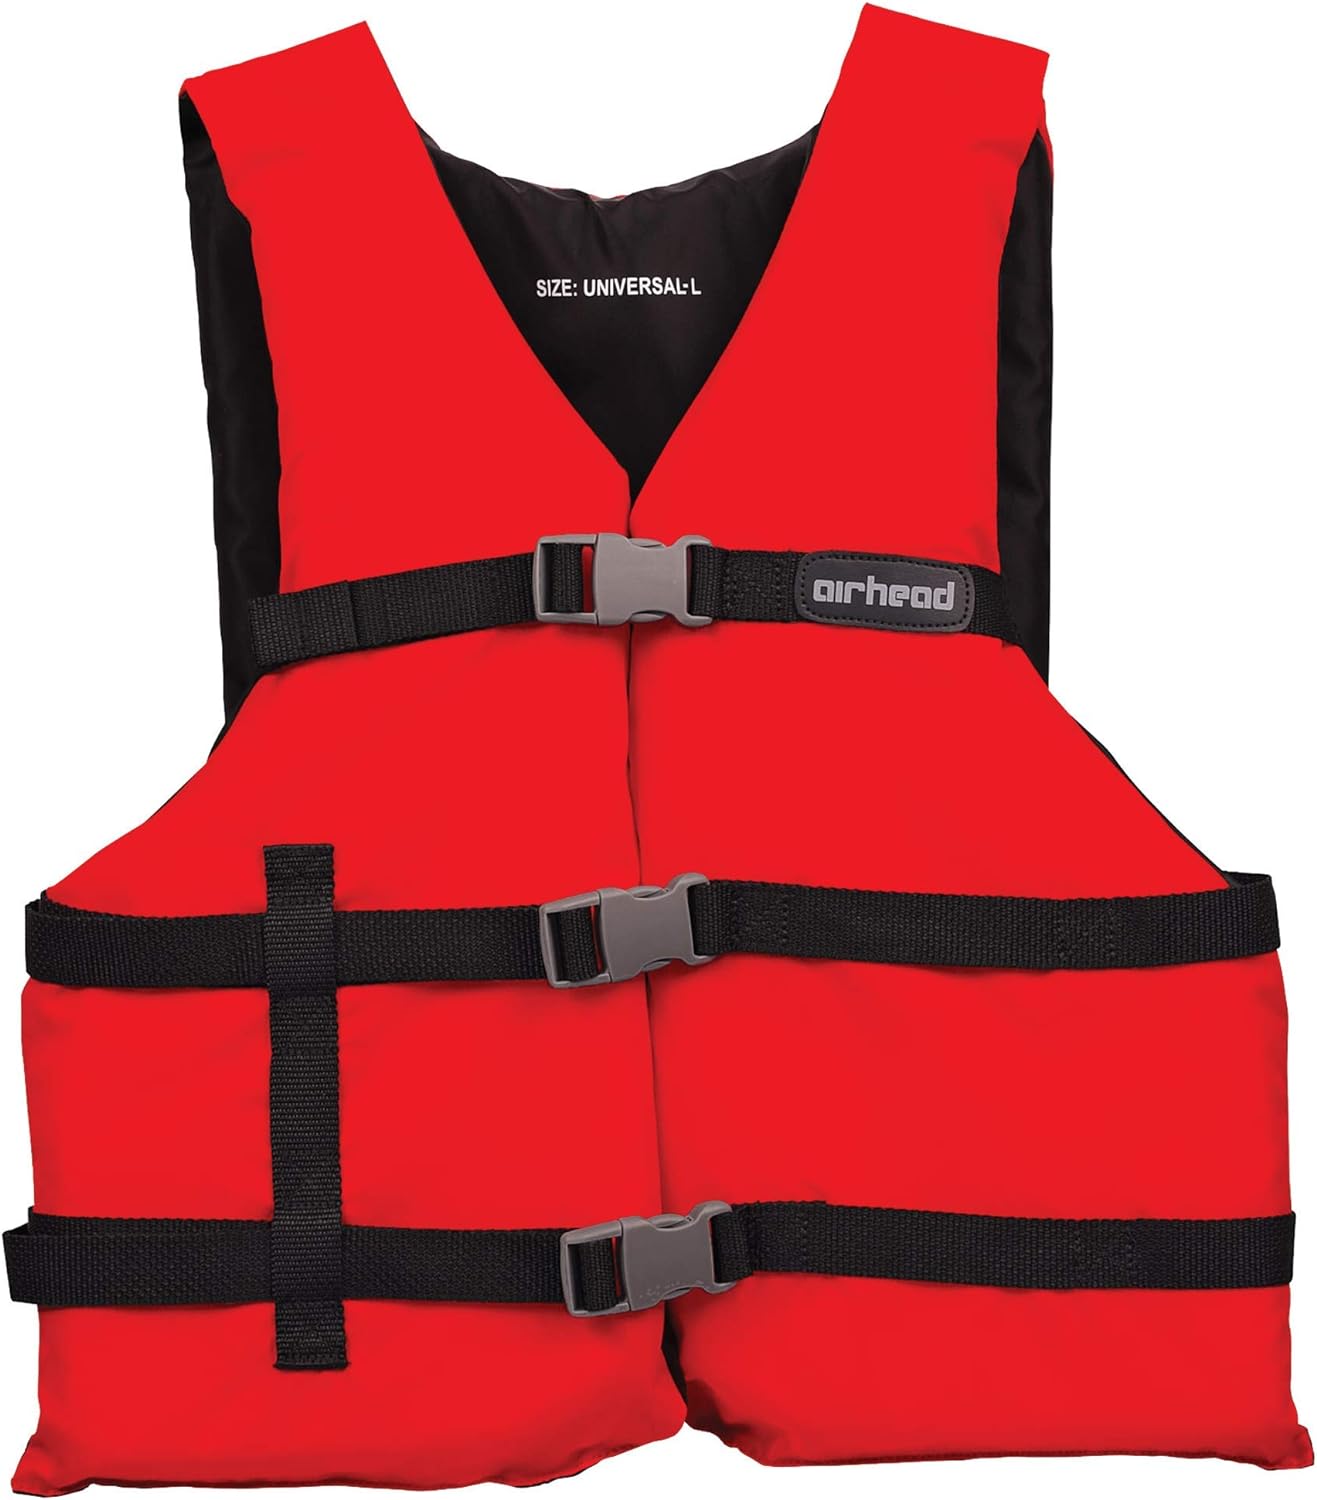 AIRHEAD General All Purpose Life Jacket Review